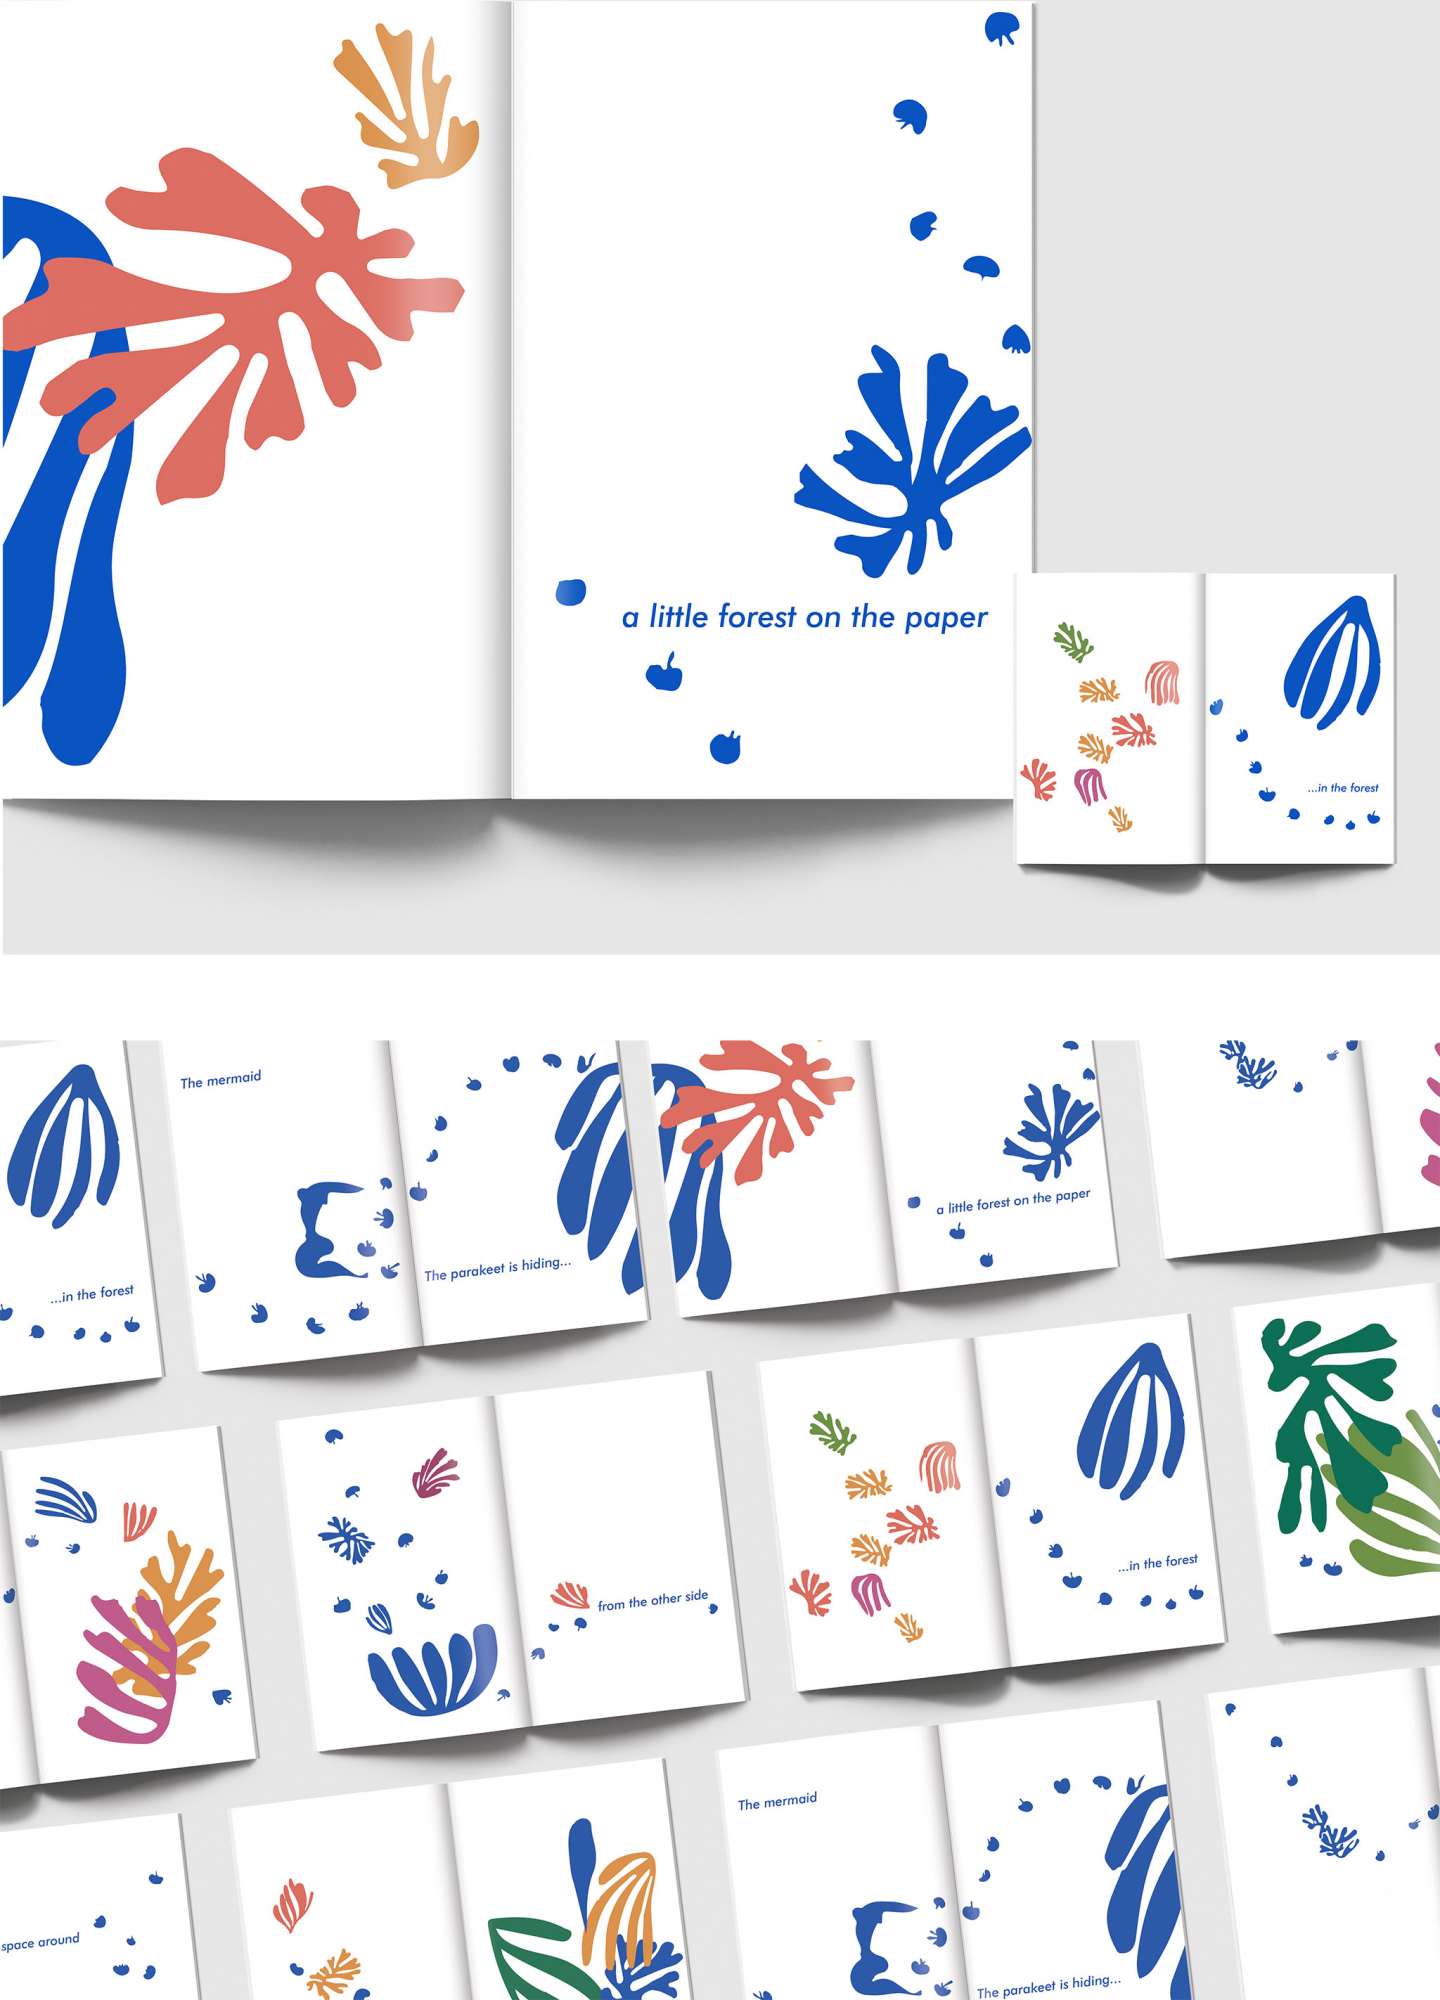 Matisse Poster and Booklet